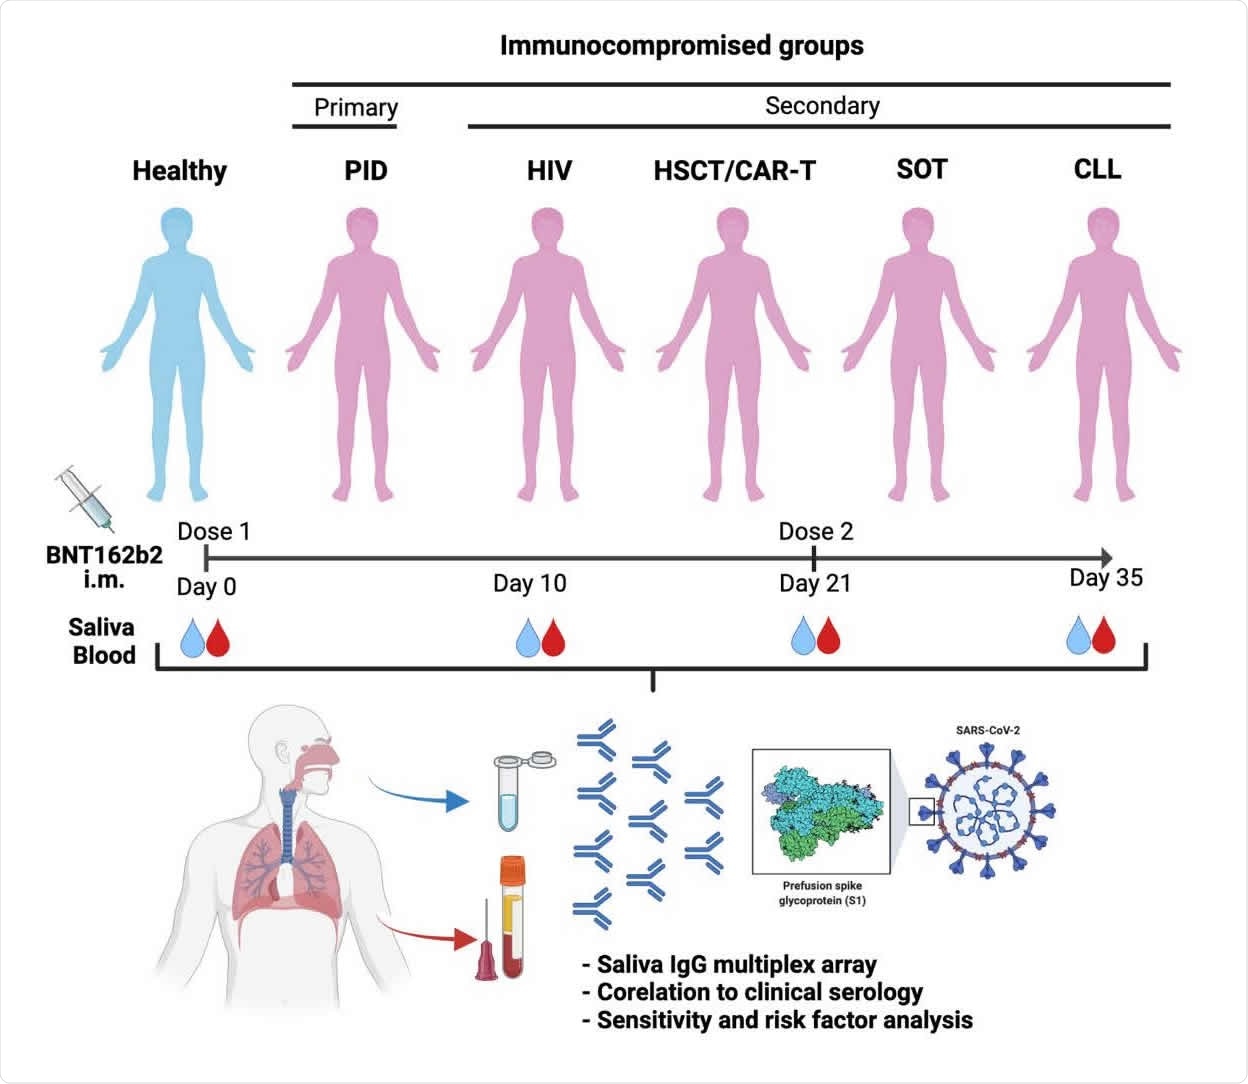 Study: Appearance of IgG to SARS-CoV-2 in saliva effectively indicates seroconversion in mRNA vaccinated immunocompromised individuals